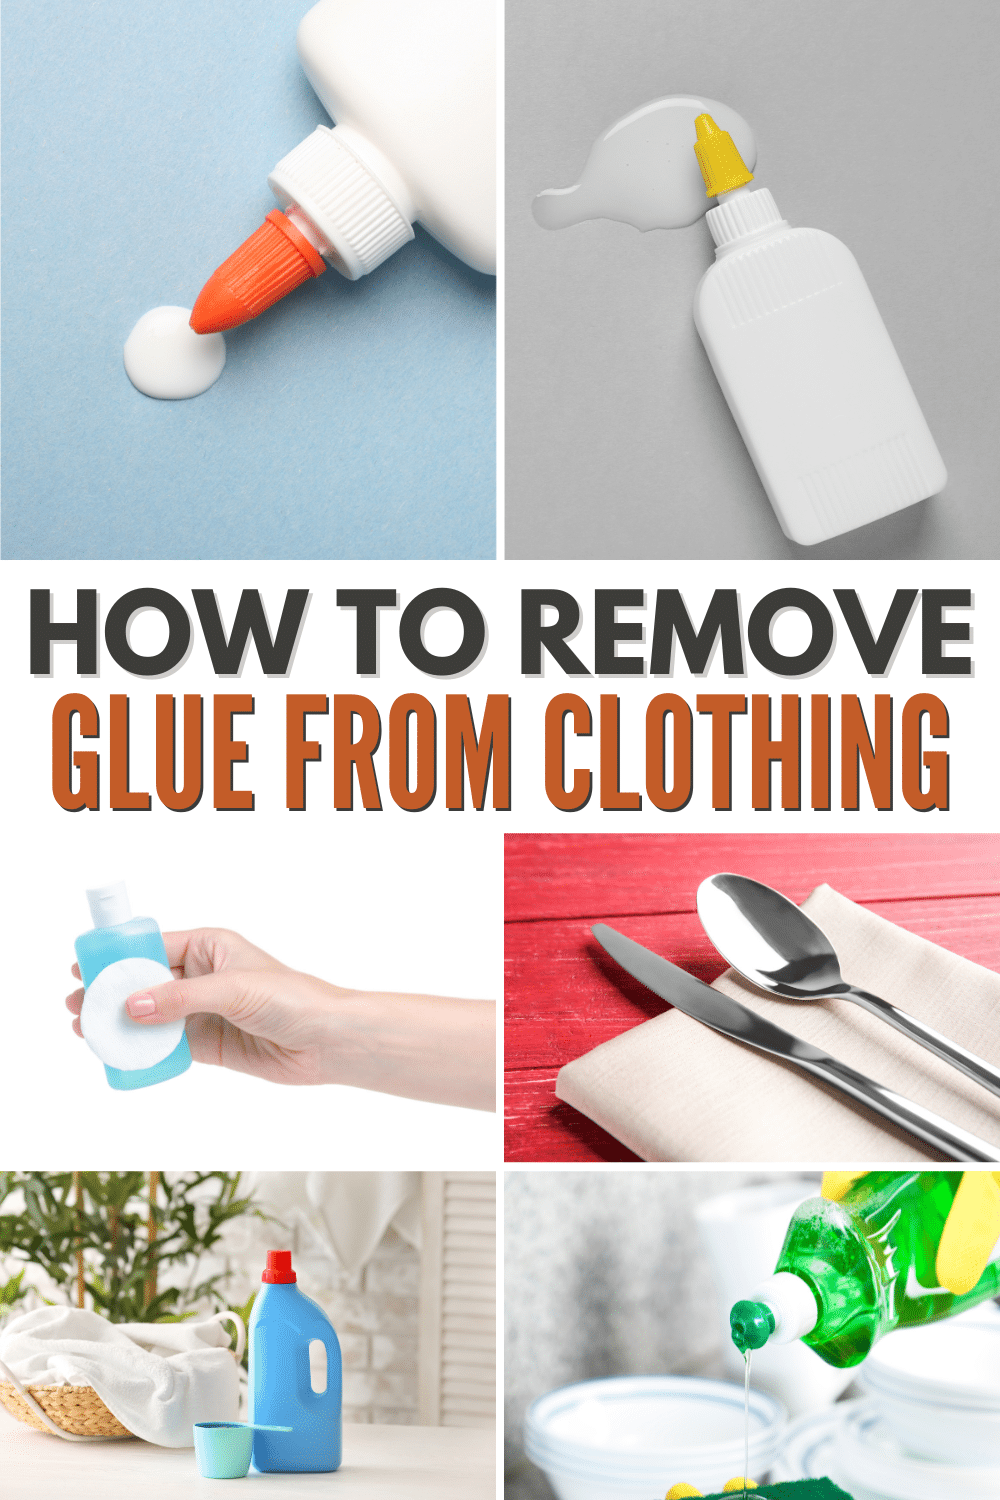 Clothing glue removal tips.